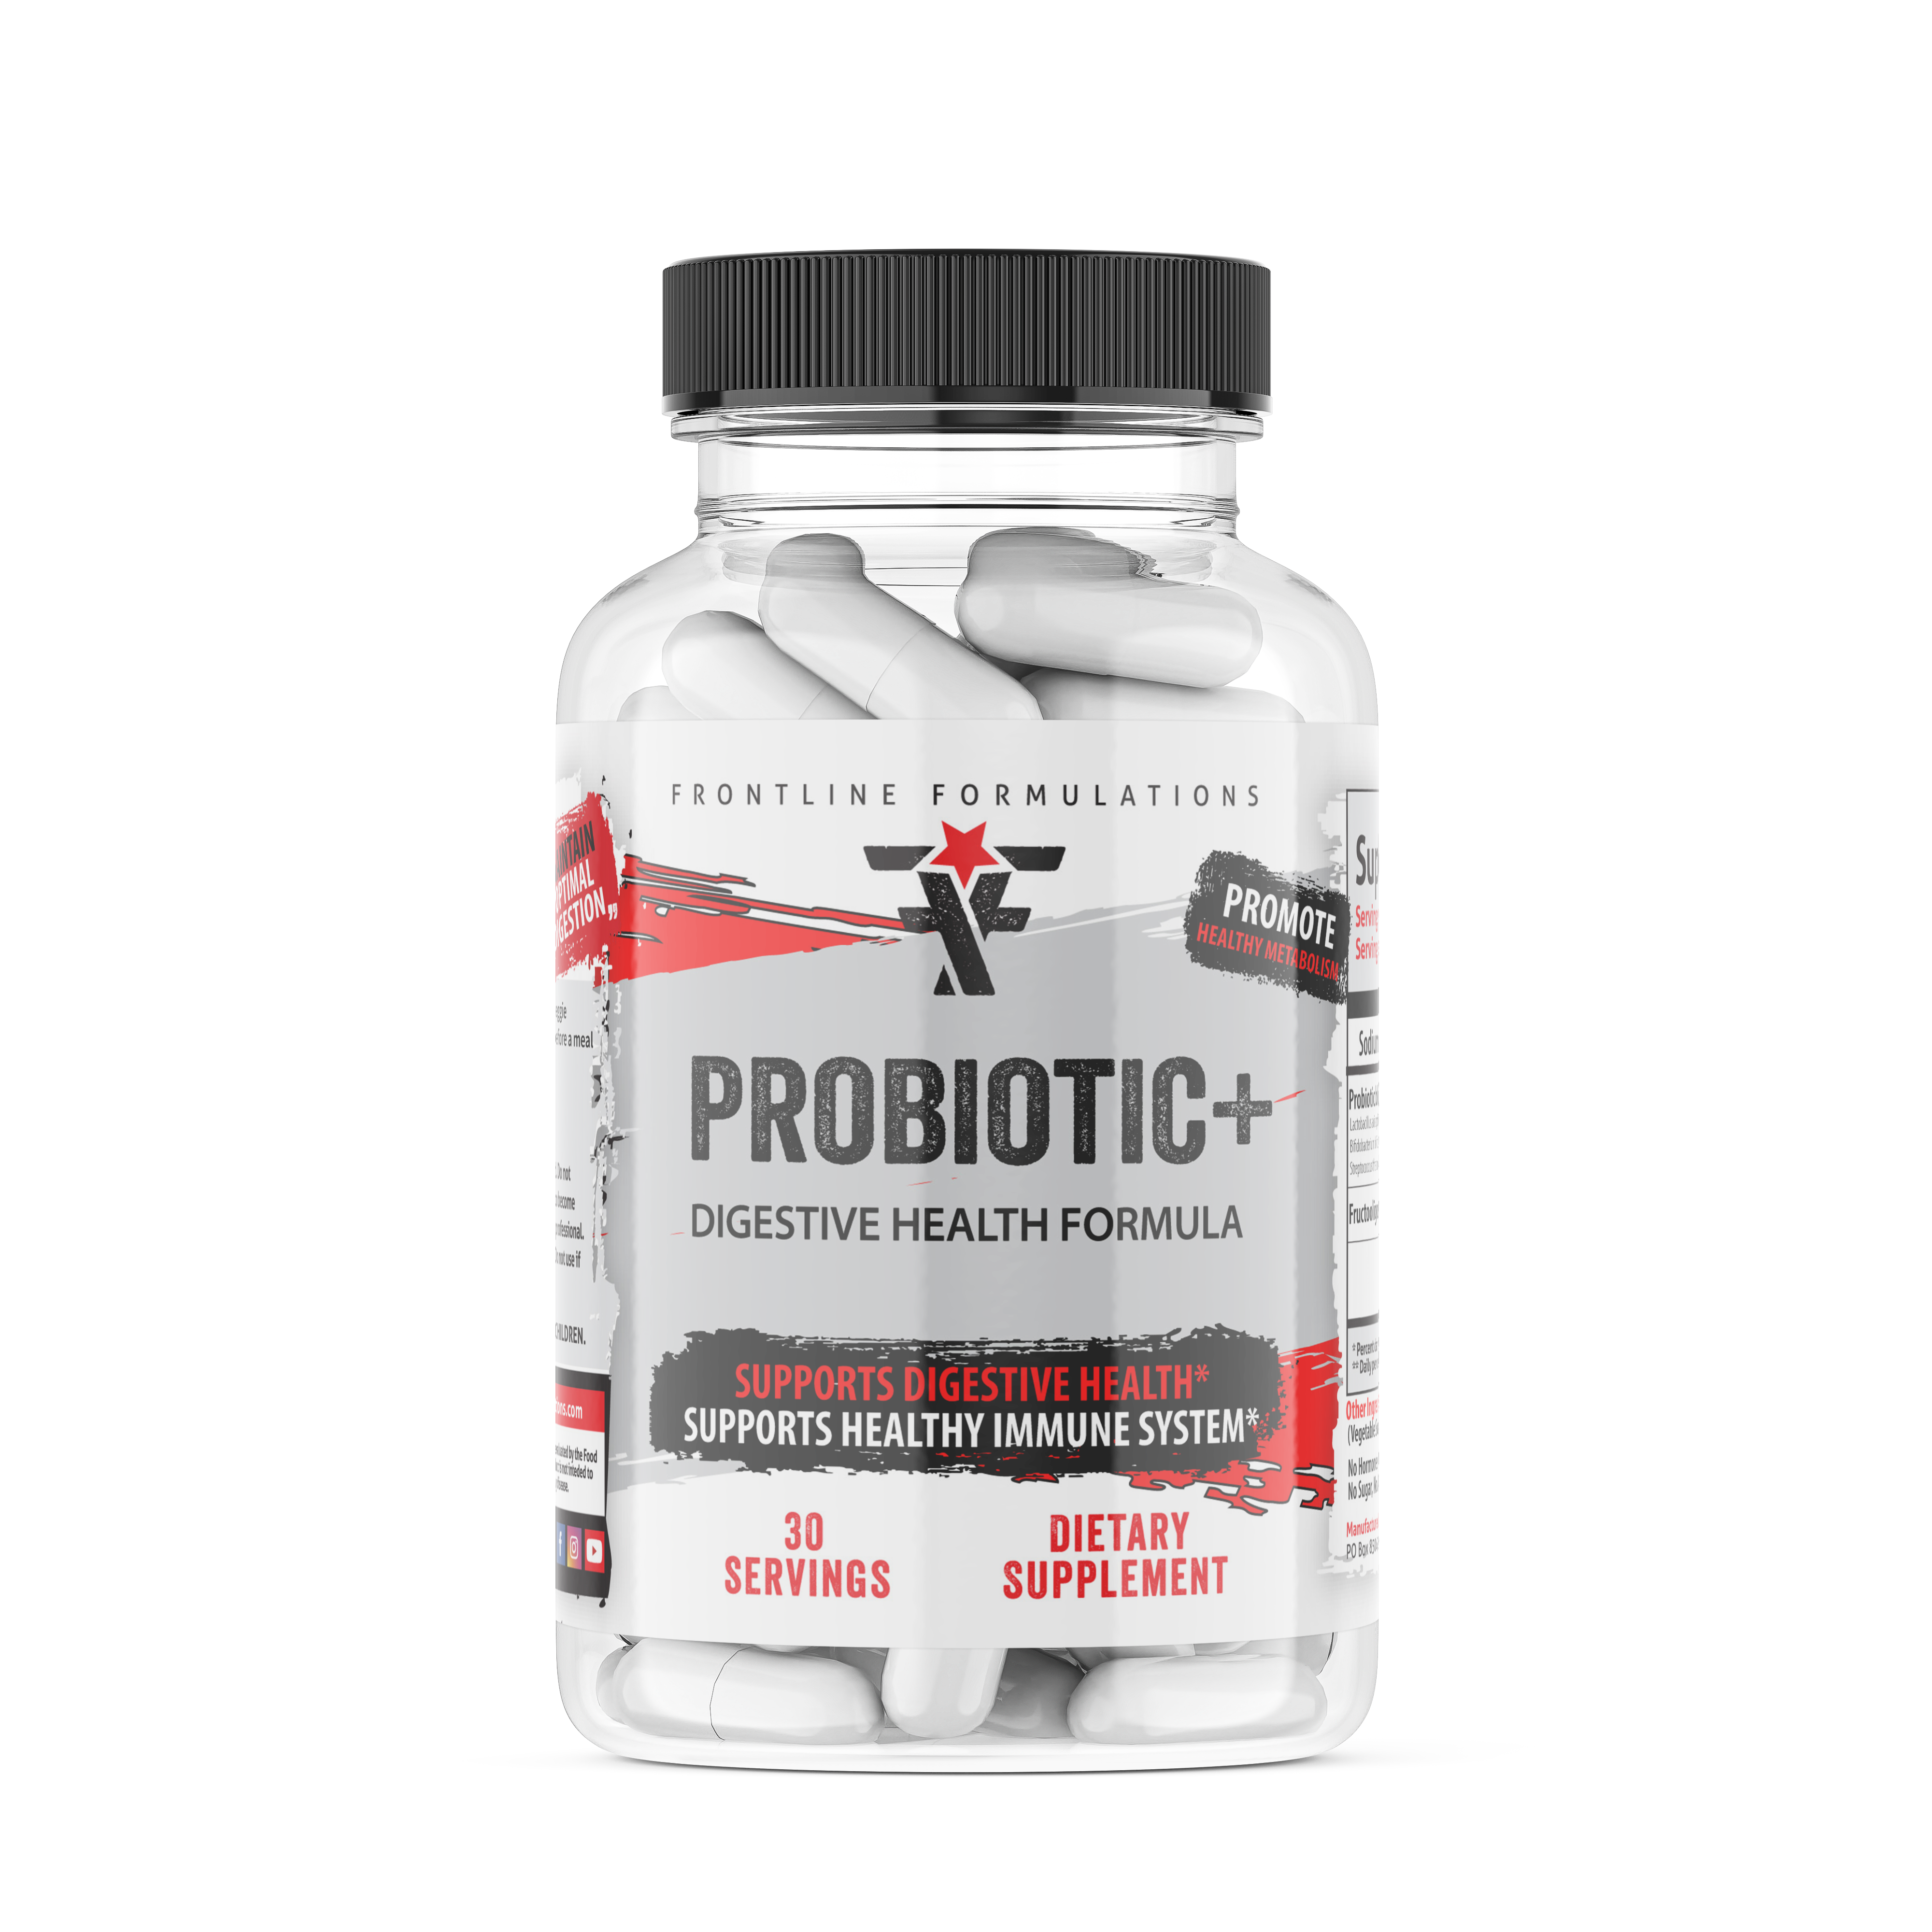 Probiotic+ Probiotic+ 10 Strains with 20 billion active cultures: Supports digestive and immune health with 20 billion cultures from 10 probiotic strains, our formula contains live microorganisms that help keep a healthy digestive tract. Supports digestiv